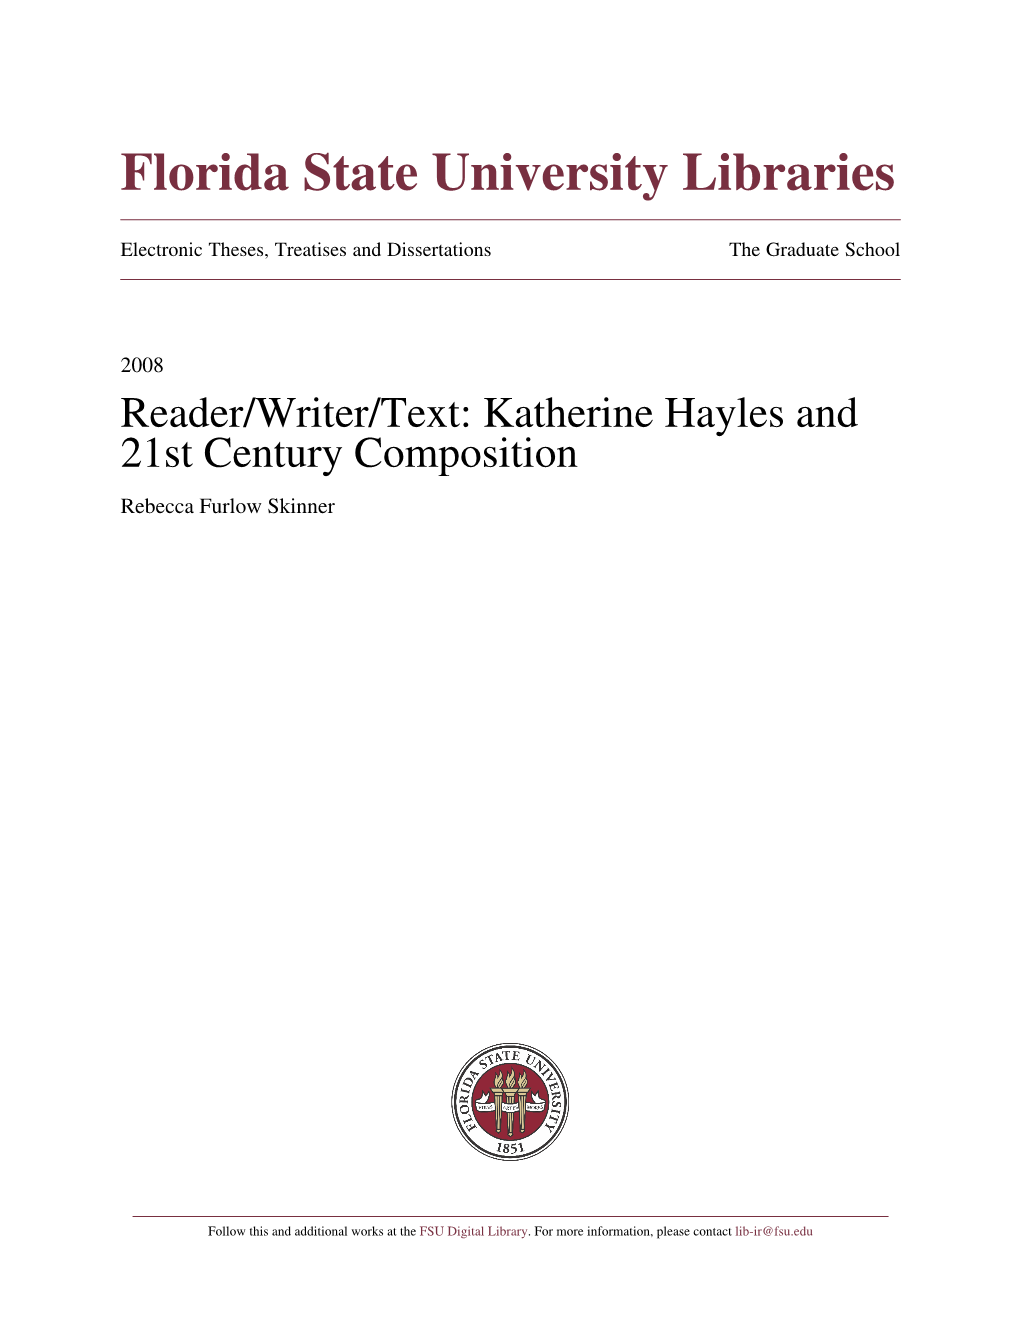 Reader/Writer/Text: Katherine Hayles and 21St Century Composition Rebecca Furlow Skinner